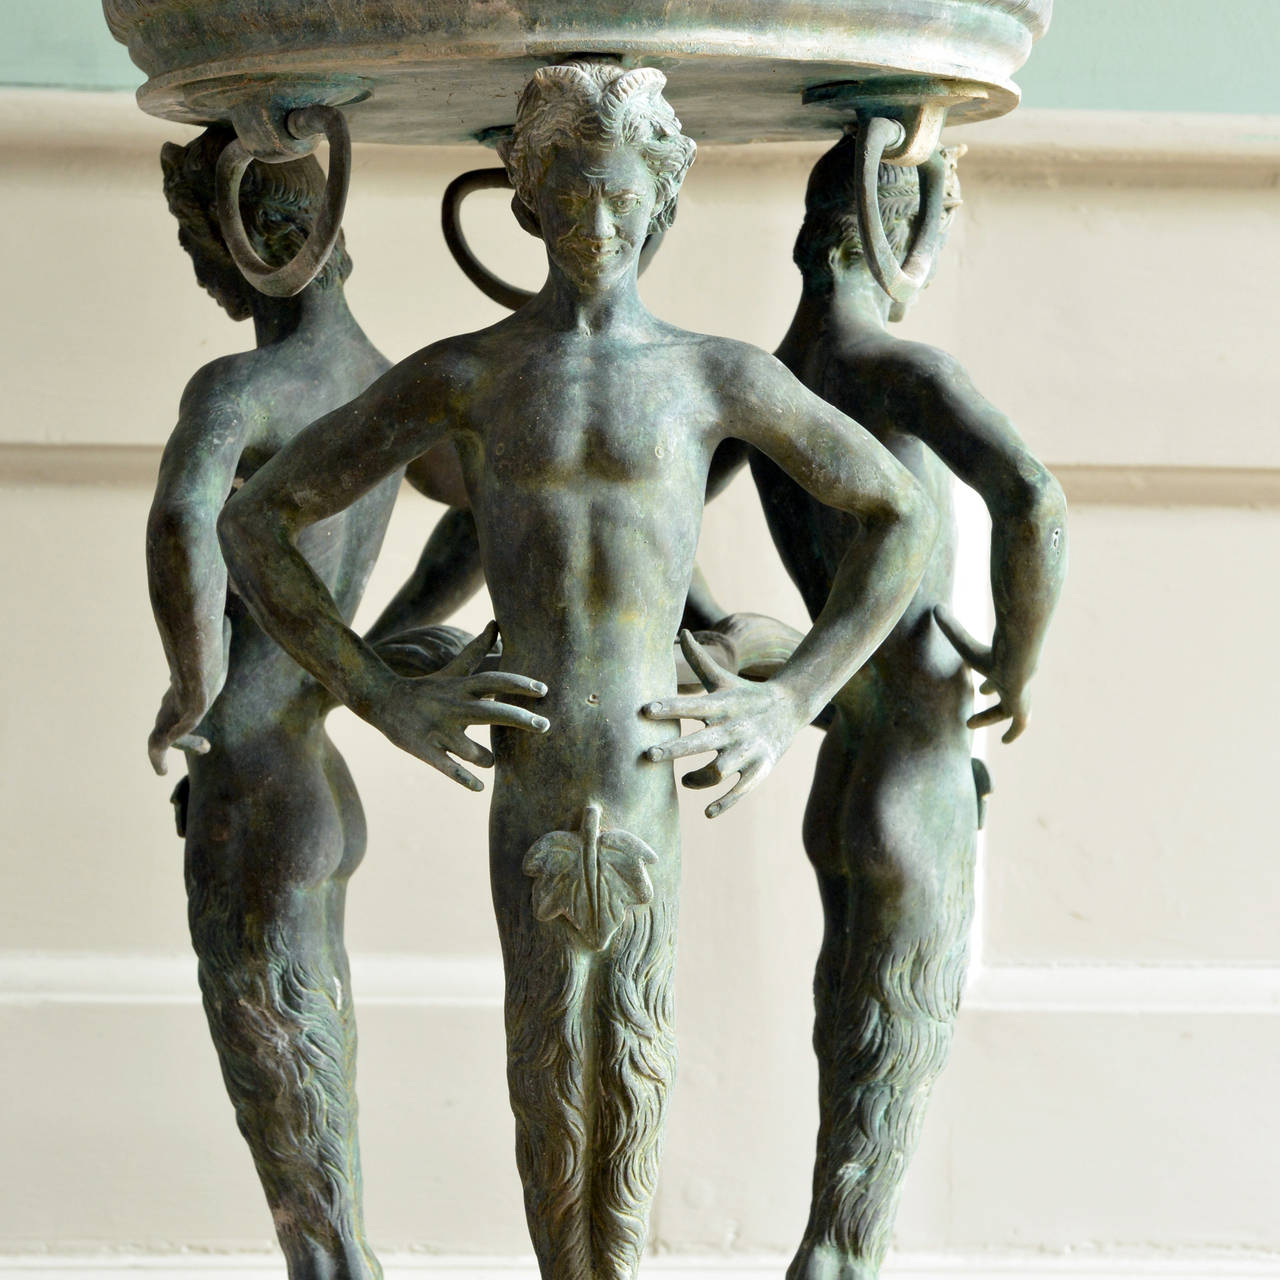 A pair of bronze Atheniennes, late nineteenth century, attributed to J. Chiurazzi & Fils, Naples.